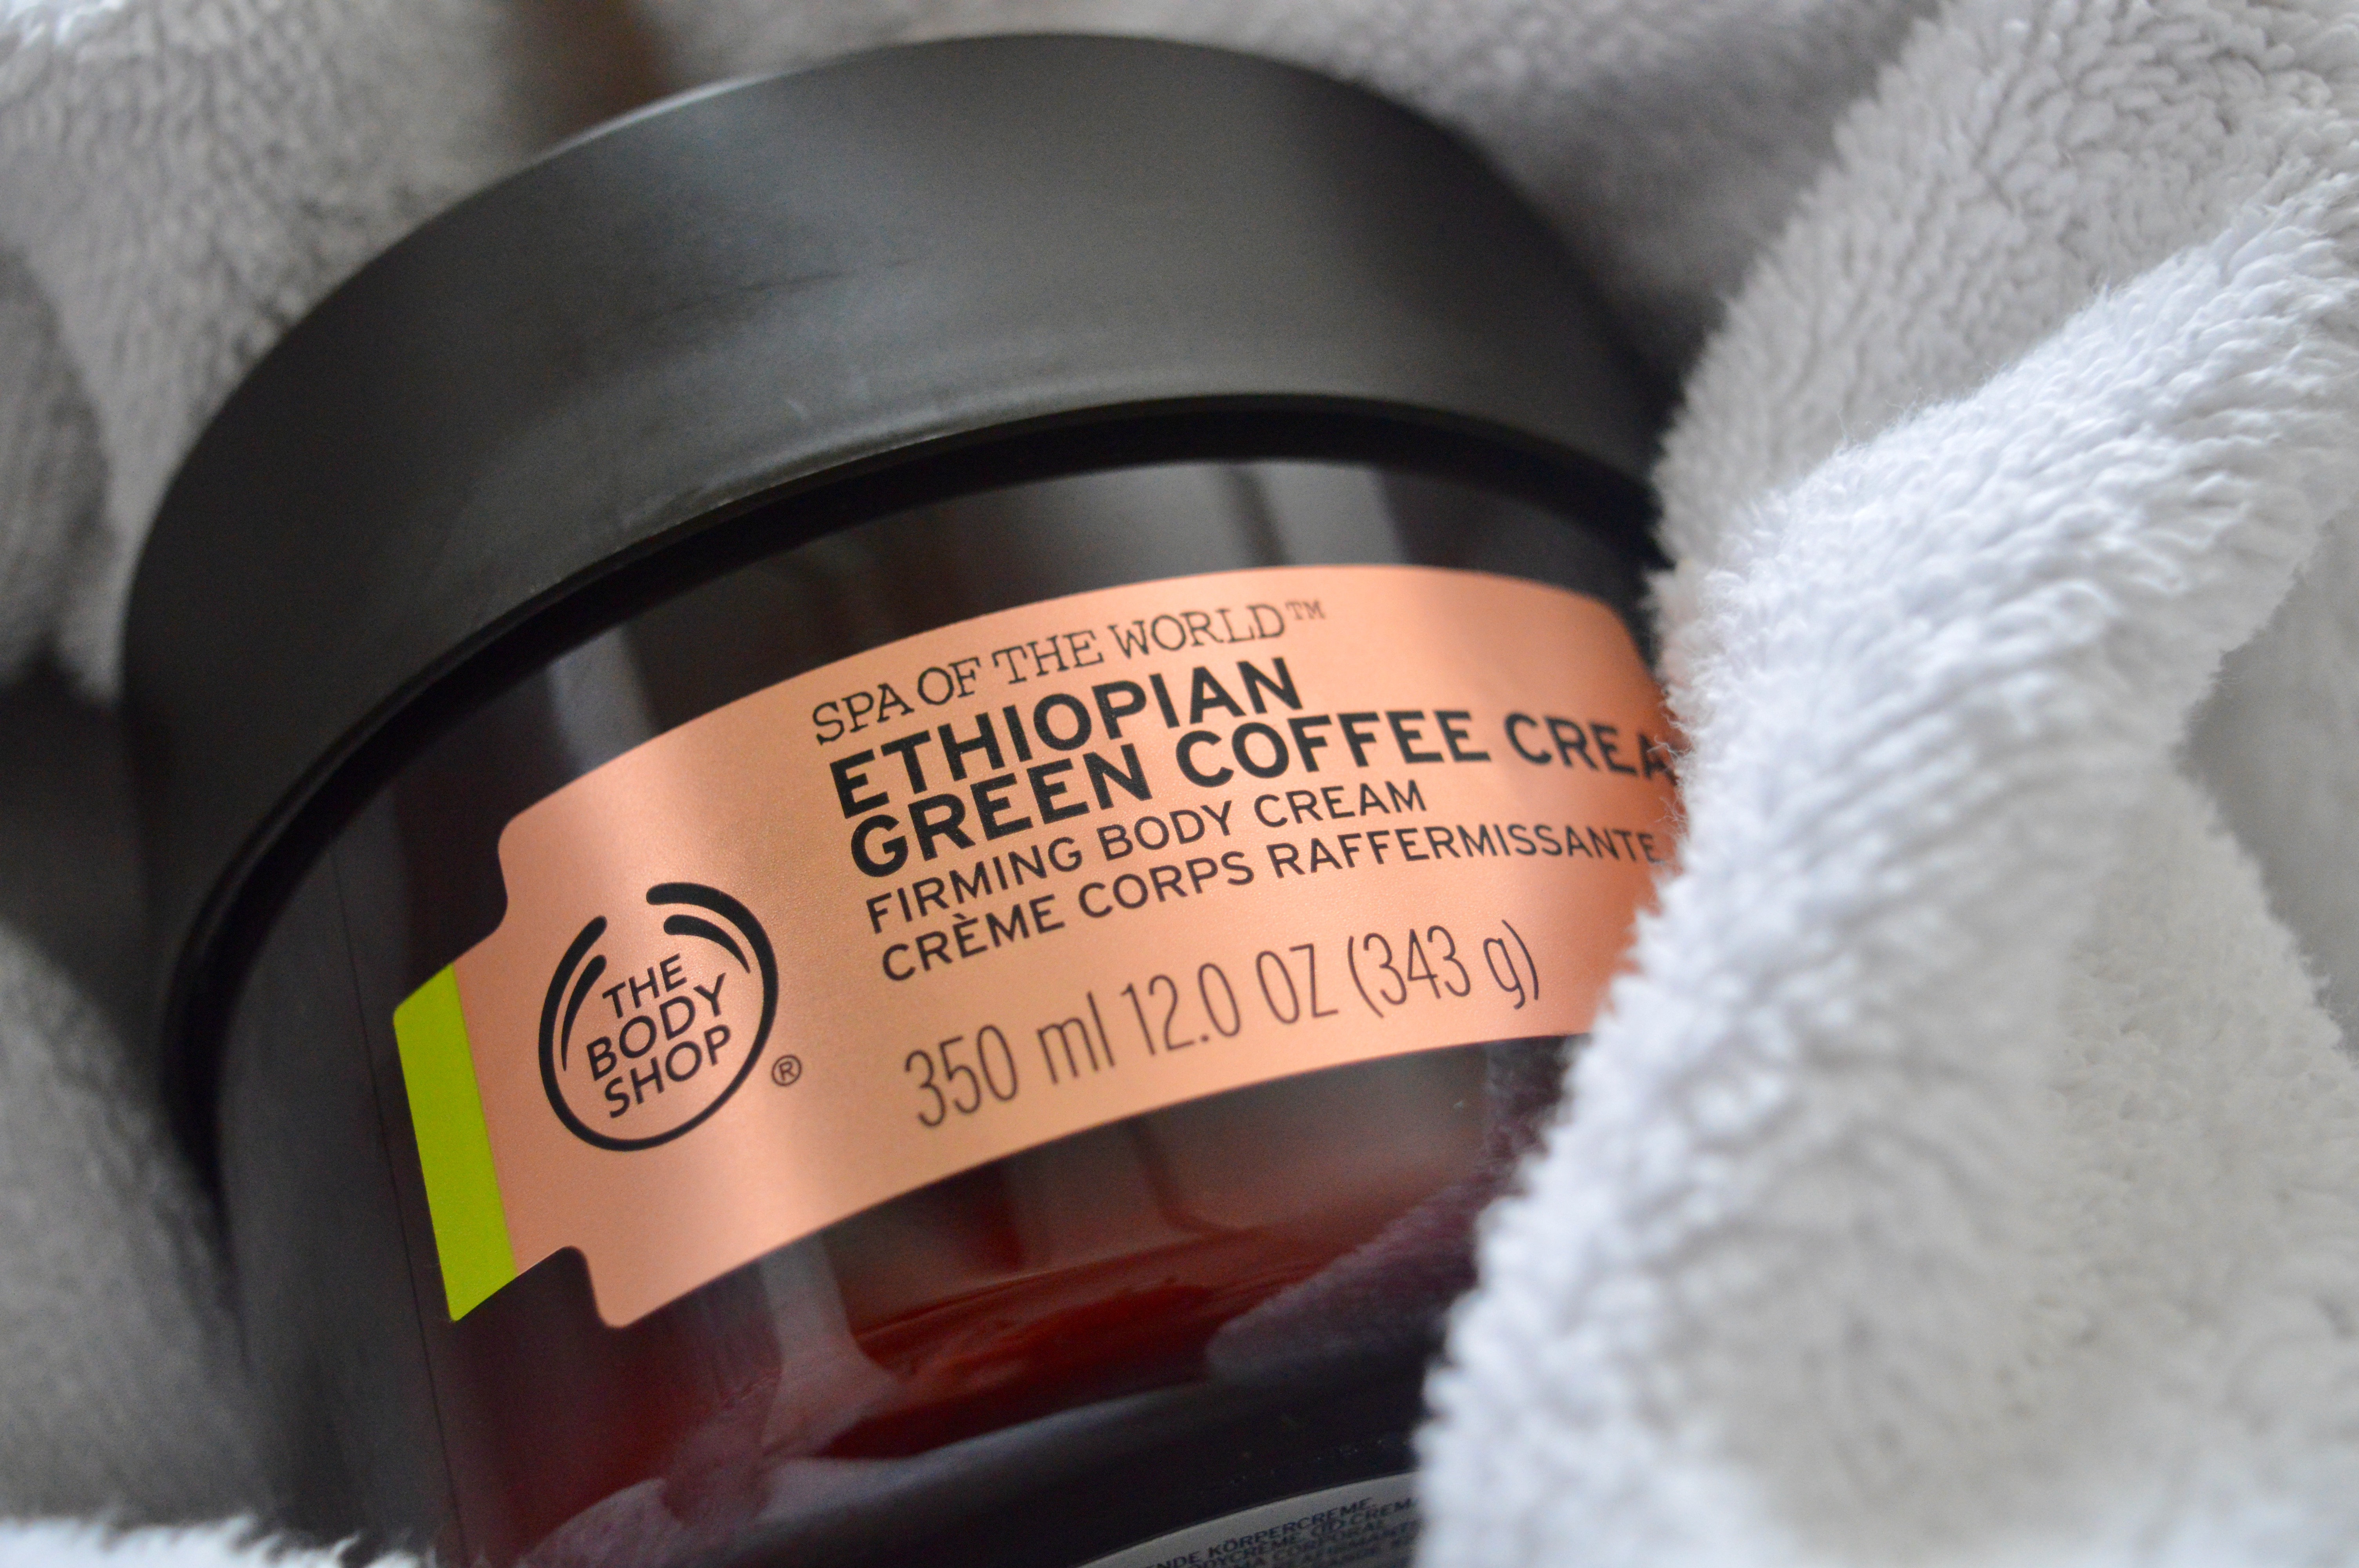 The Body Shop Spa of the World Firming and Toning Range Elle Blonde